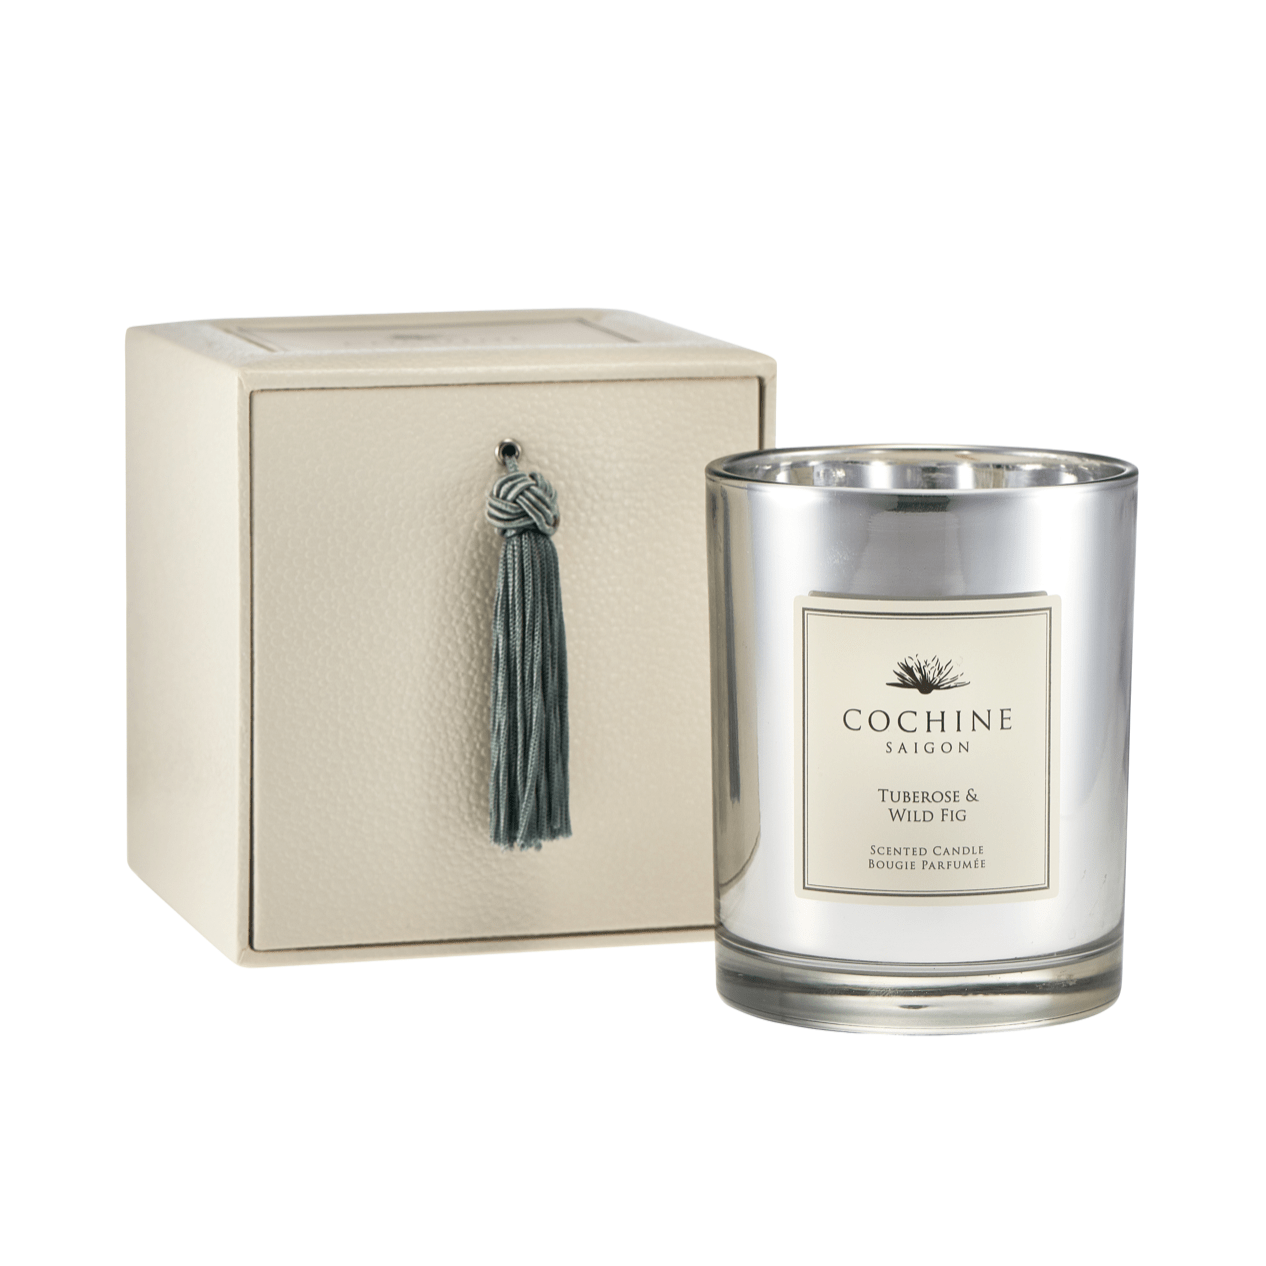 Cochine Home Fragrances of Cochines luxury scented candles and Cochine reed diffuers in Cochine Tuberose & Wild Fig Candle